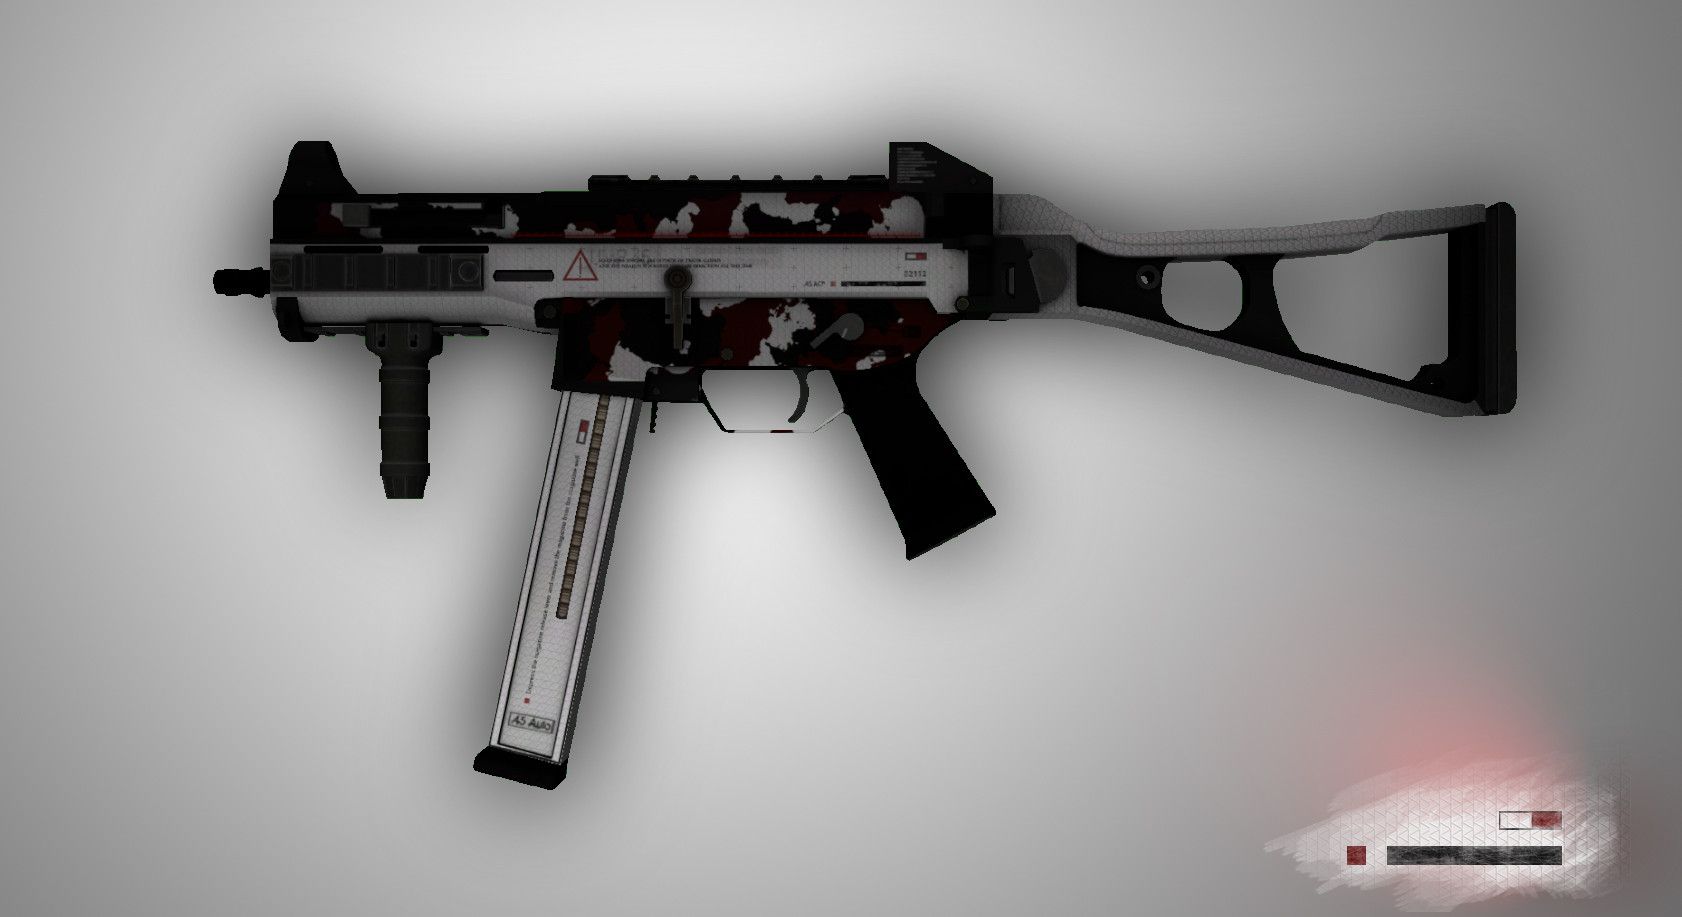 Free download UMP 45 and P250 Technician series polycount